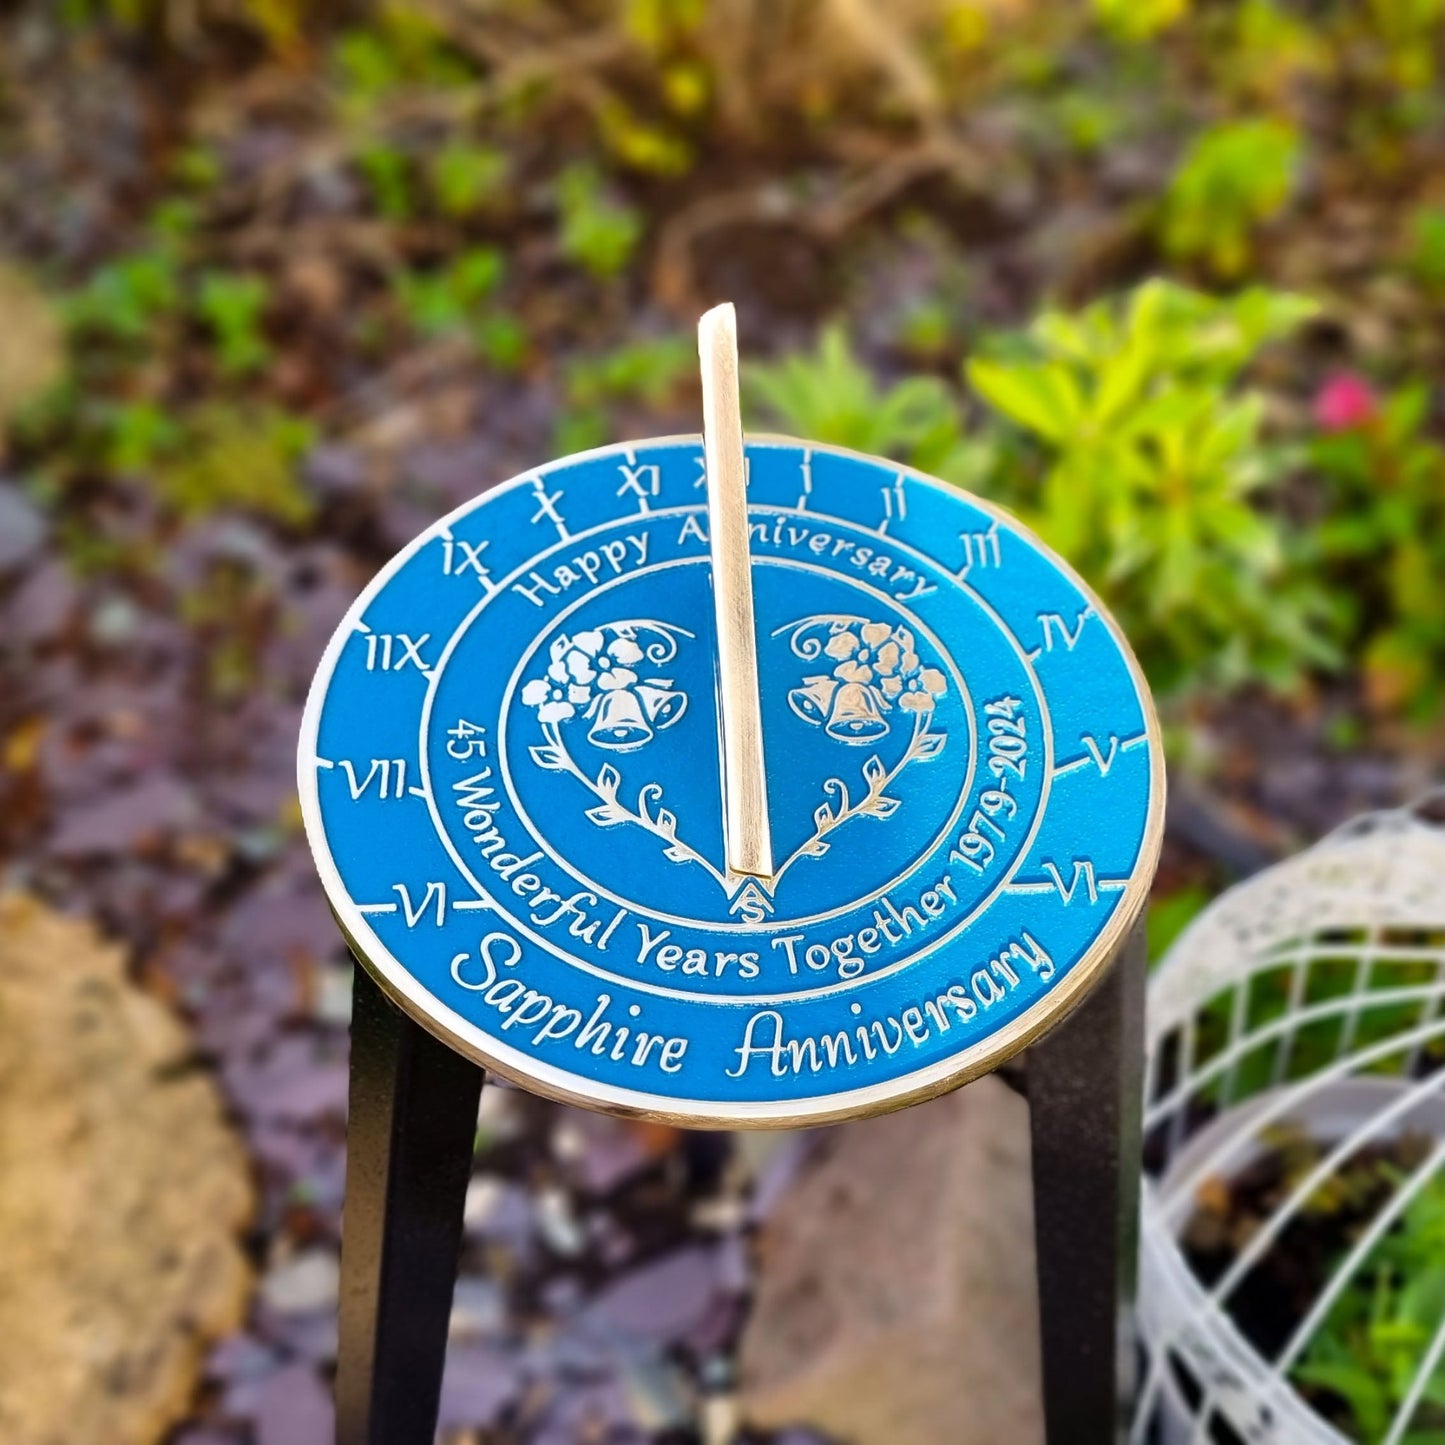 Sapphire 45th Anniversary Sundial Gift - The Metal Foundry